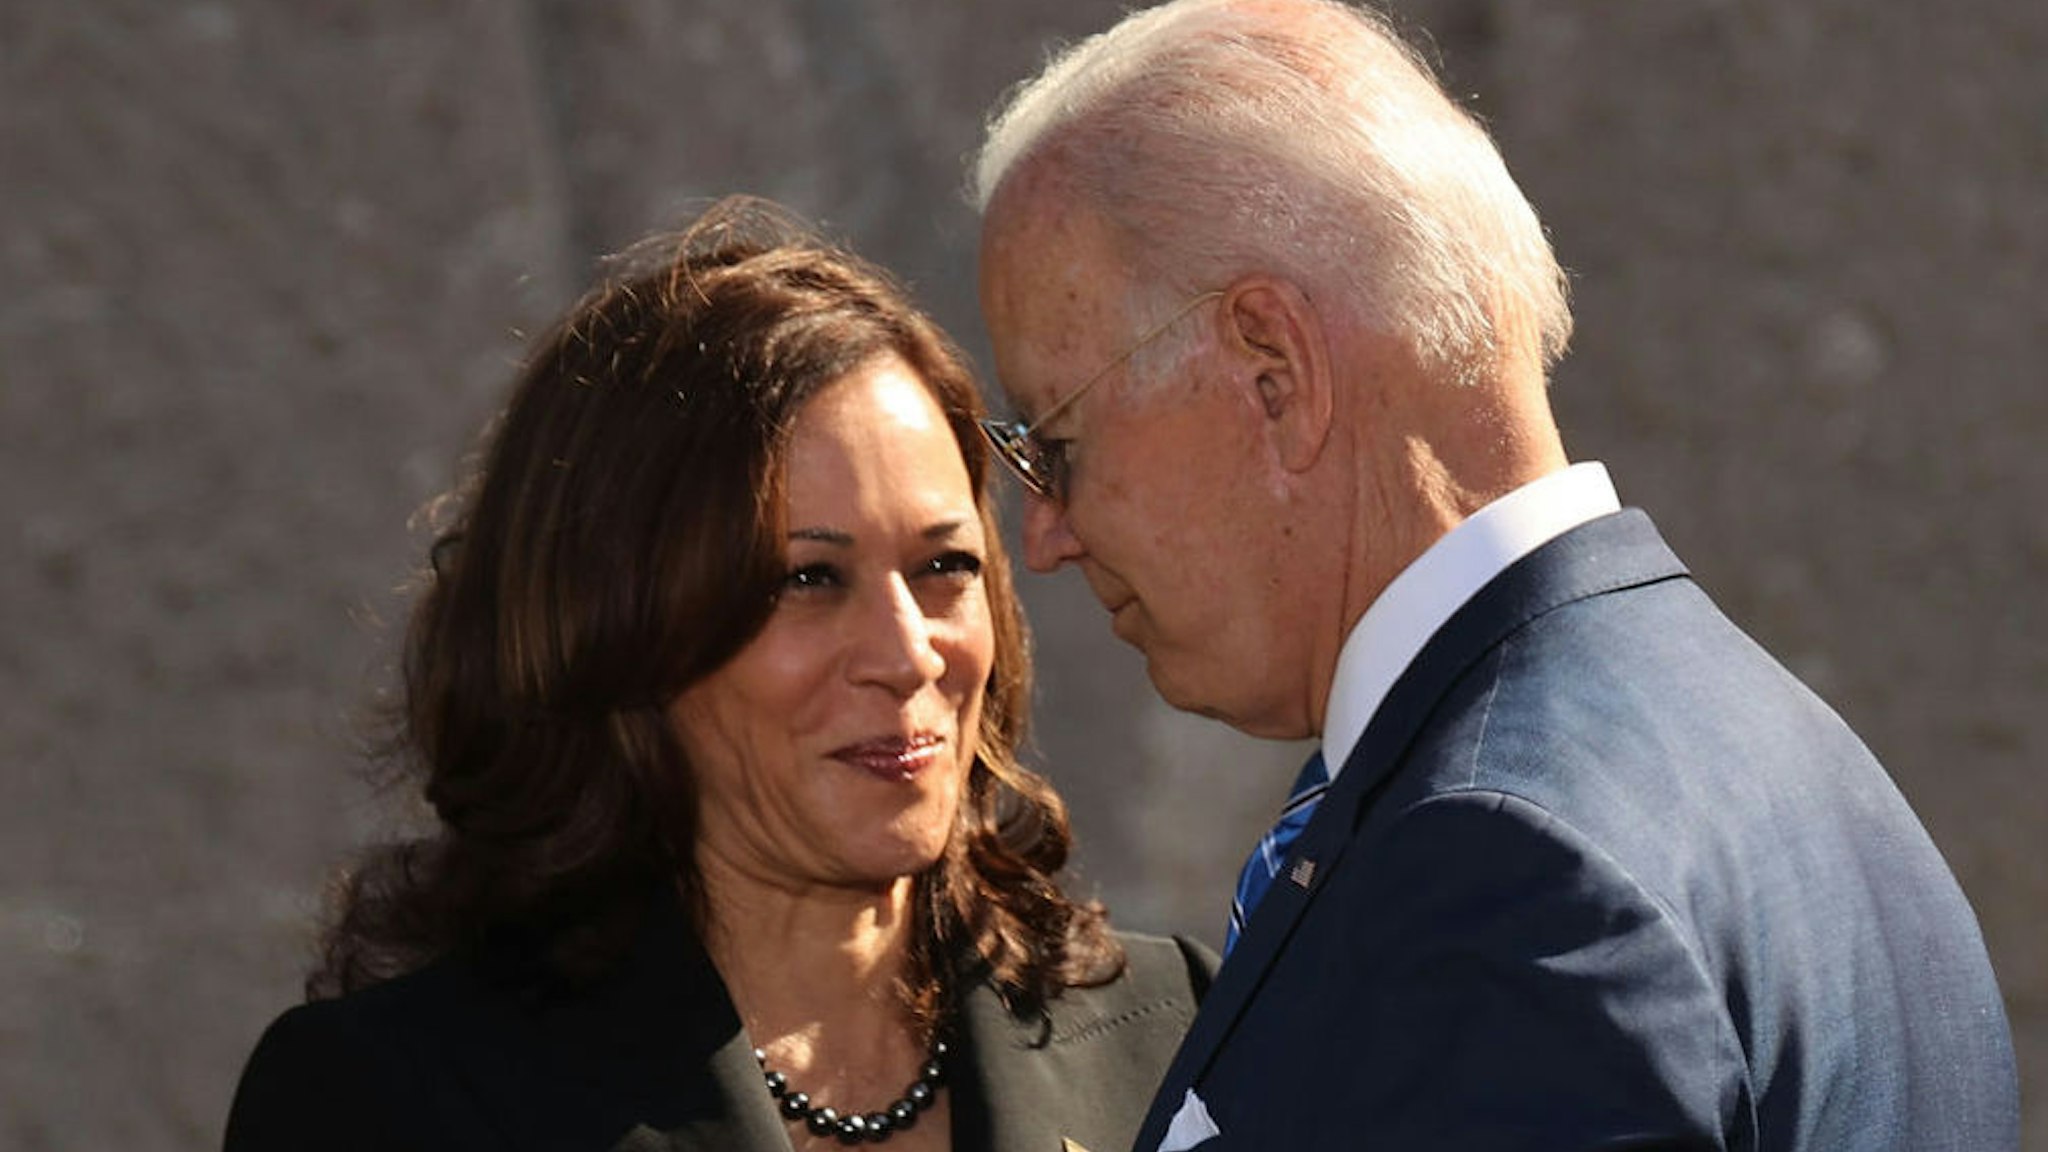 U.S. President Joe Biden (R) and Vice President Kamala Harris shake hands during the 10th-anniversary celebration of the Martin Luther King, Jr. Memorial near the Tidal Basin on the National Mall on October 21, 2021 in Washington, DC.